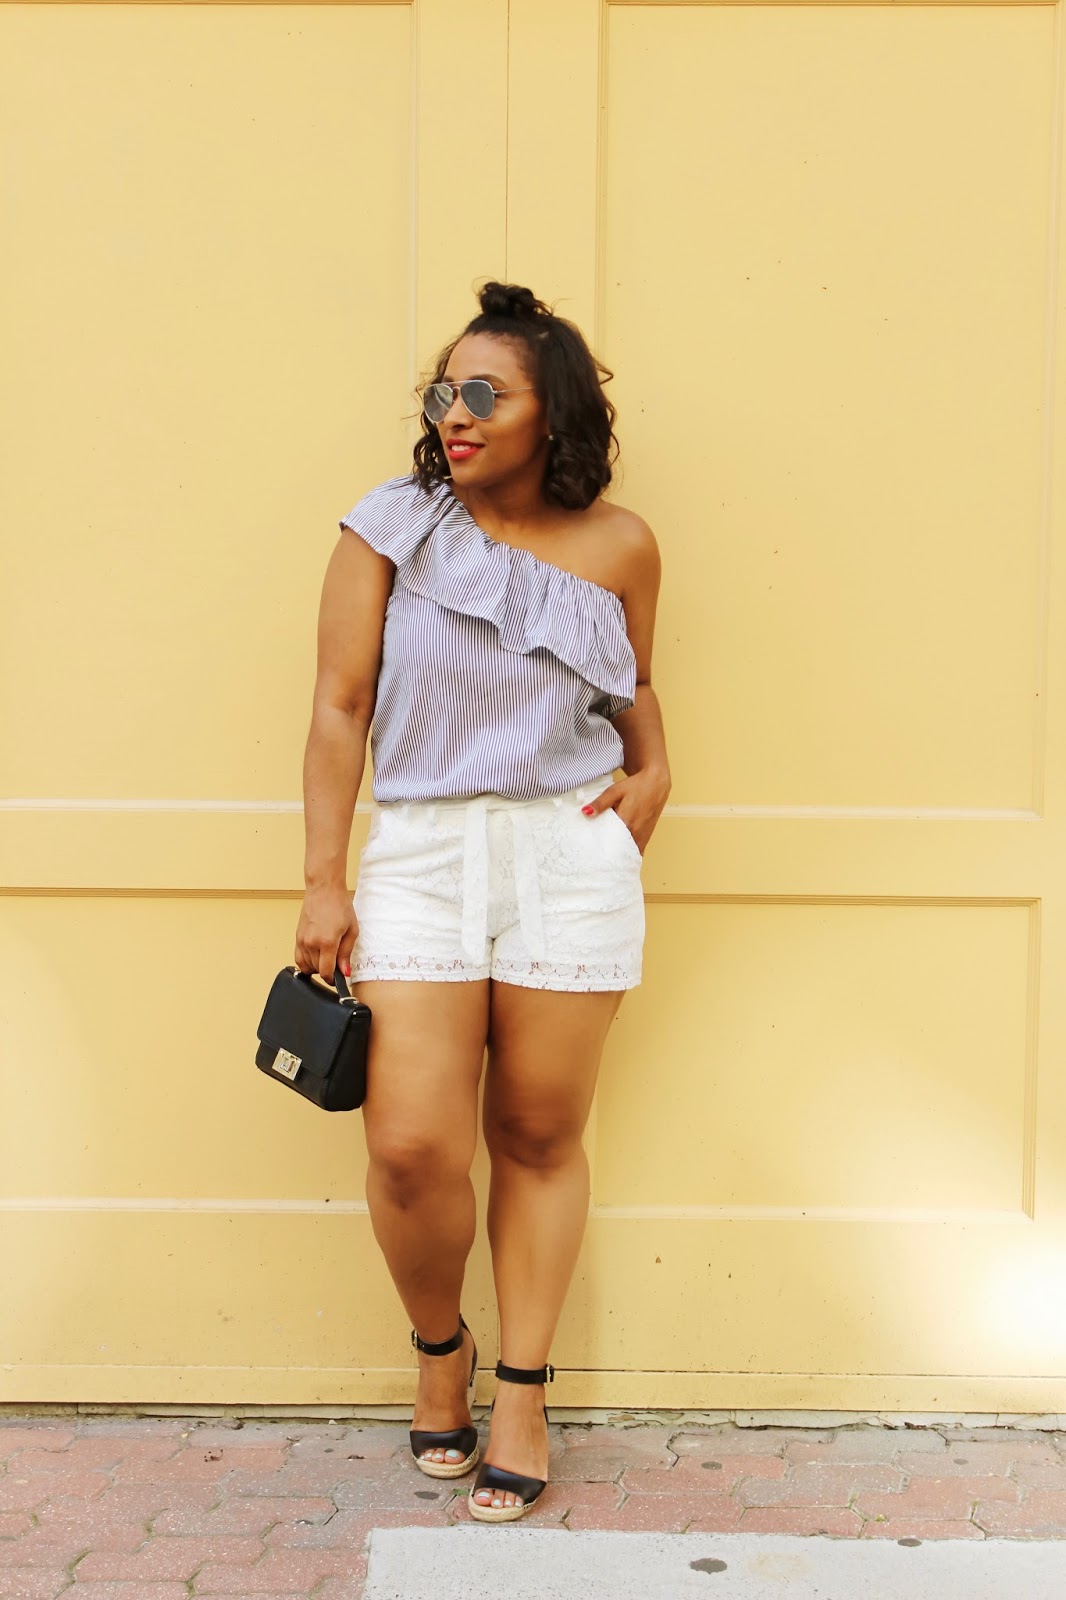 White Lace Shorts, one shoulder trend, summer outfits, white looks, atlantic city board walk, summer outfit ideas, summer shorts, one shoulder top, lace shorts, walking in streets